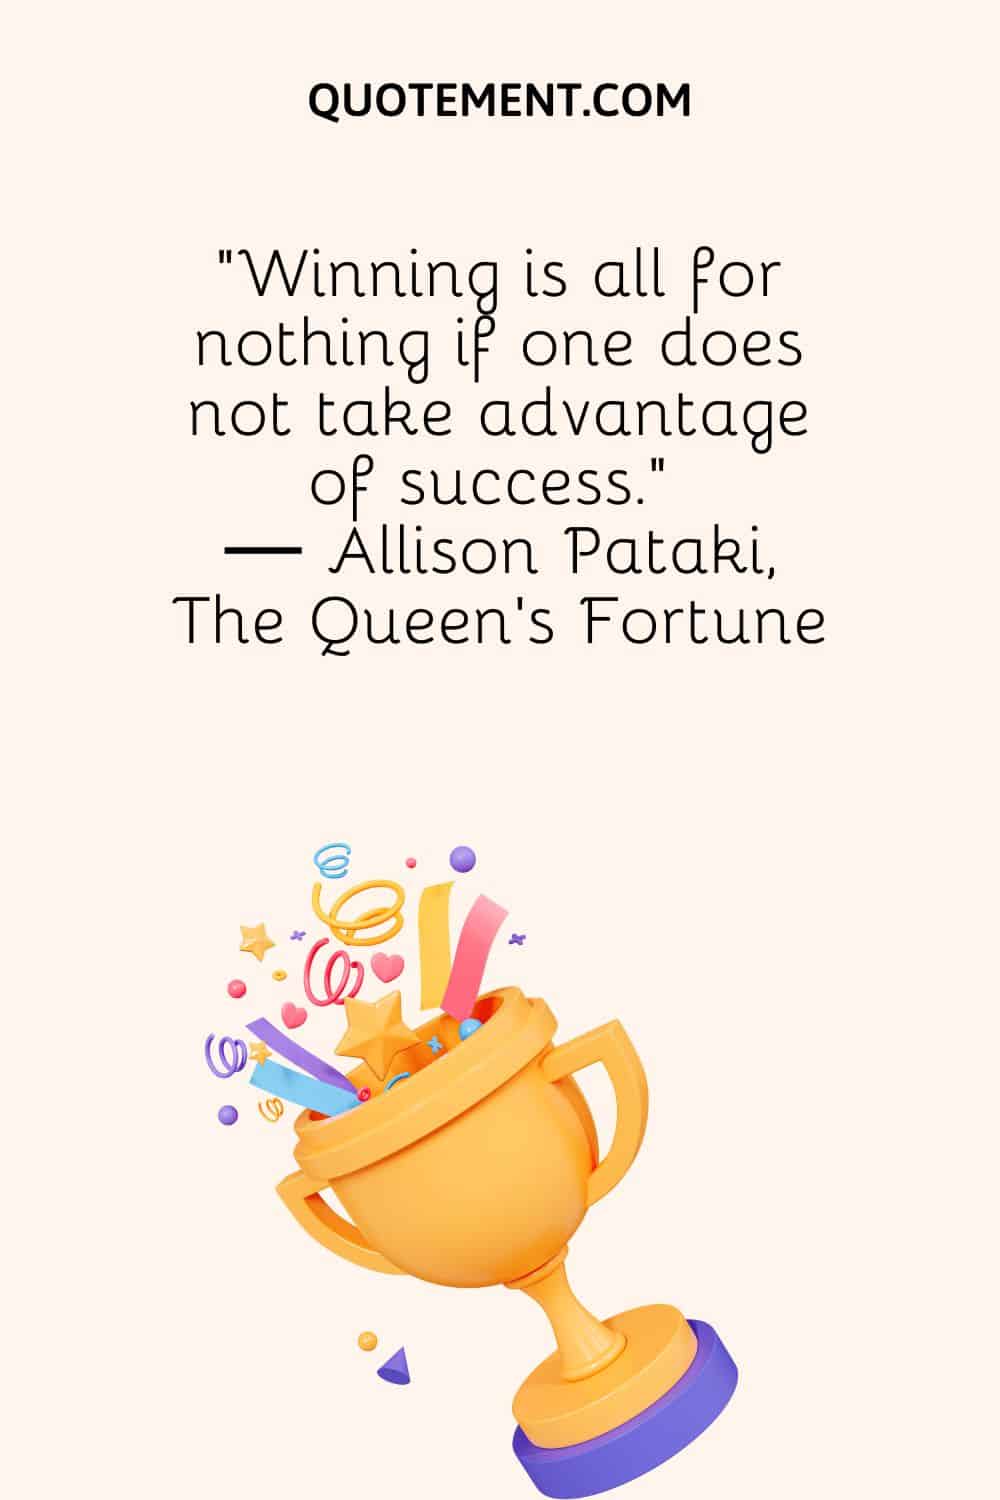 “Winning is all for nothing if one does not take advantage of success.” ― Allison Pataki, The Queen's Fortune